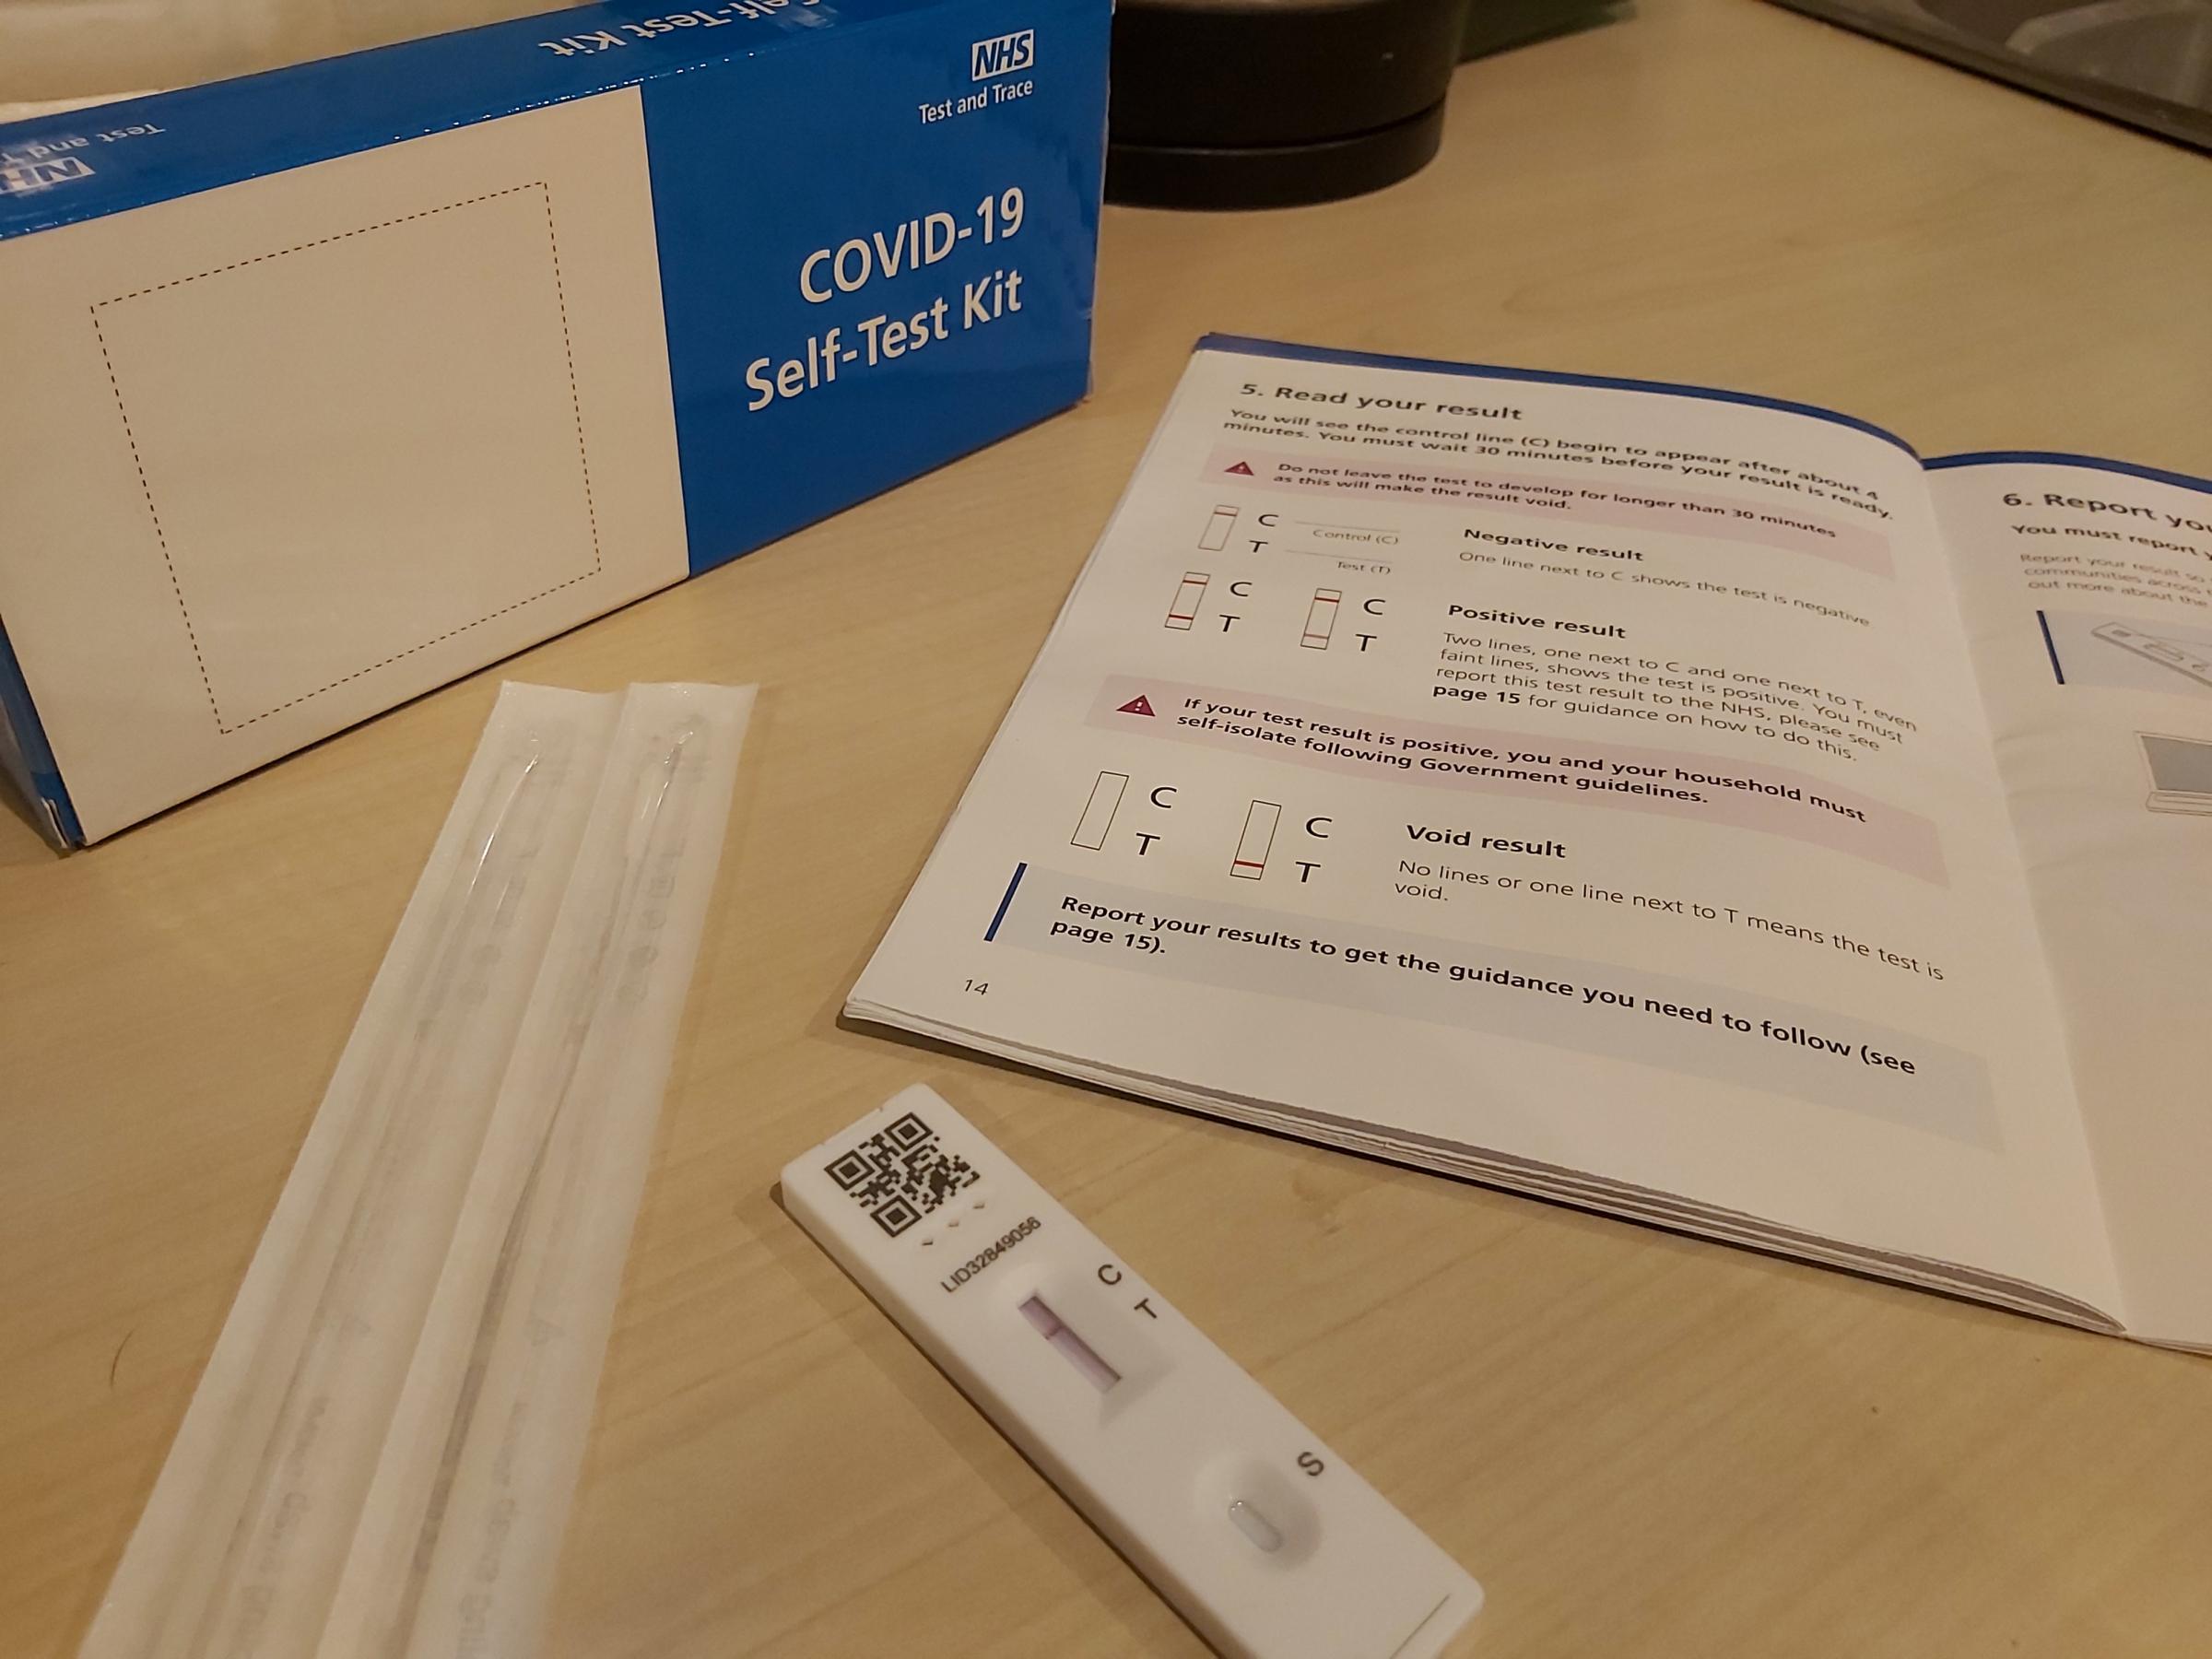 Report Covid lateral flow test result Scotland: Explained